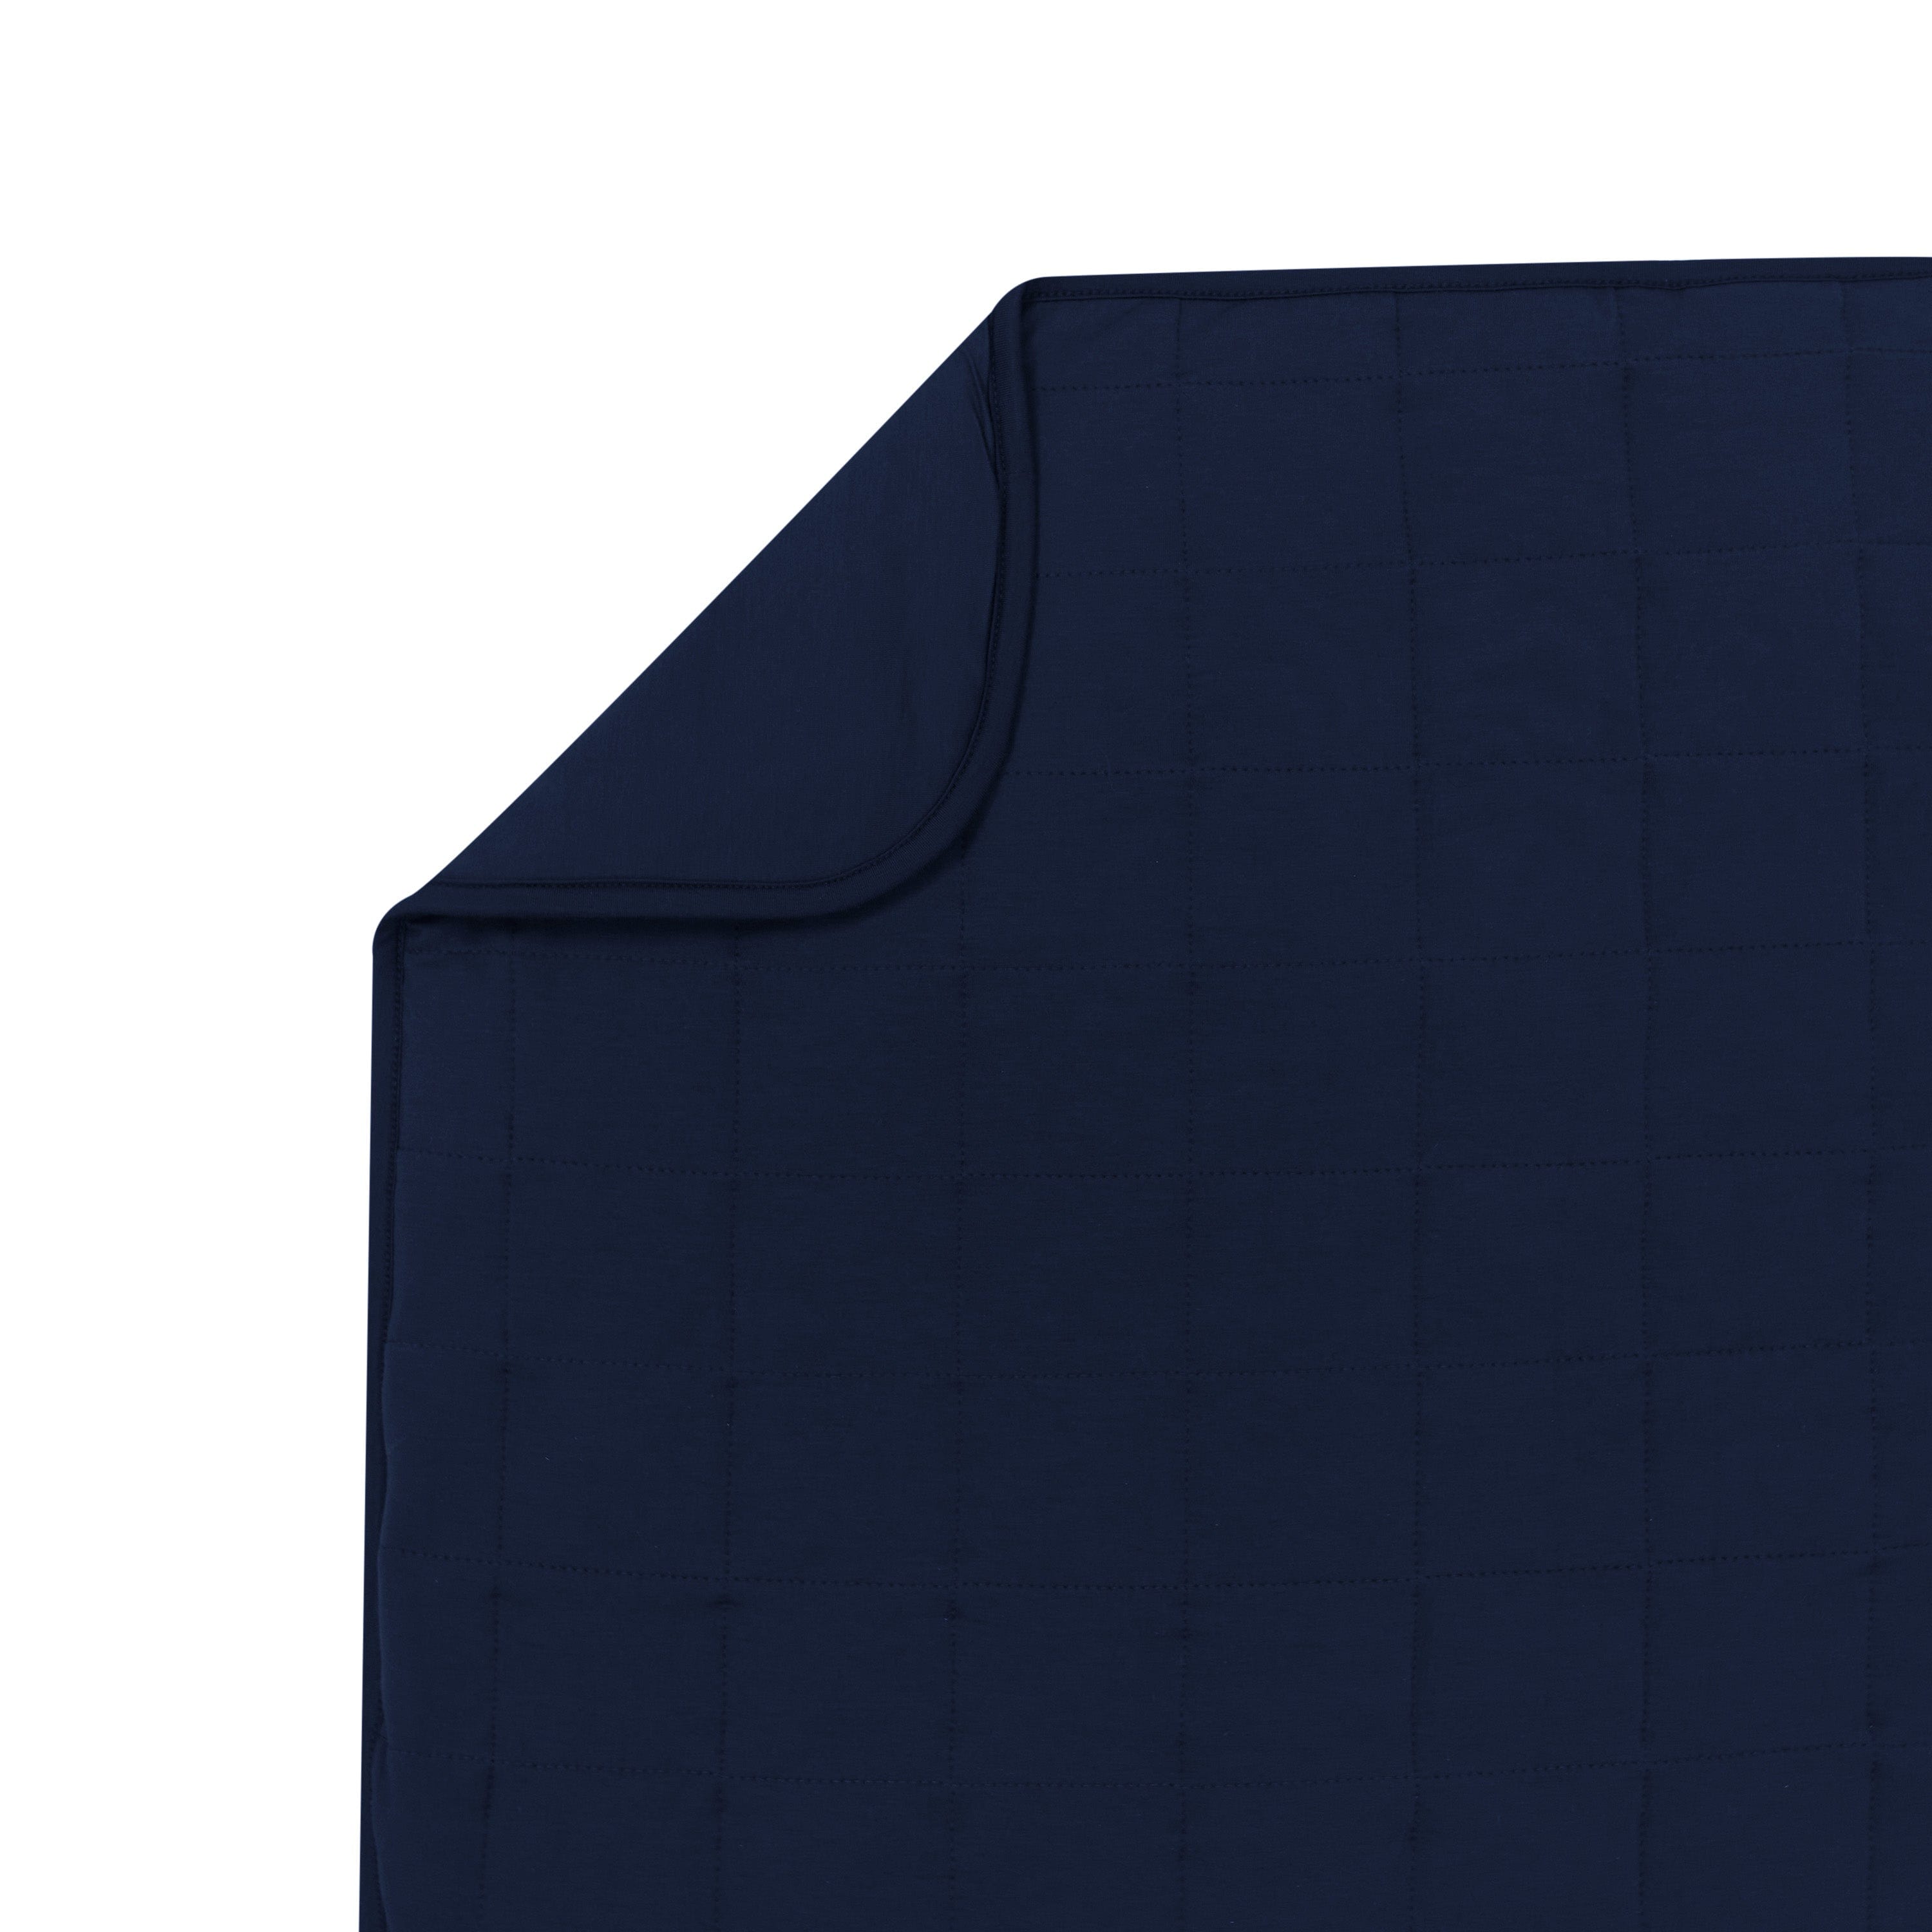 Quilted bamboo Kyte Baby Youth Blanket in Navy 2.5